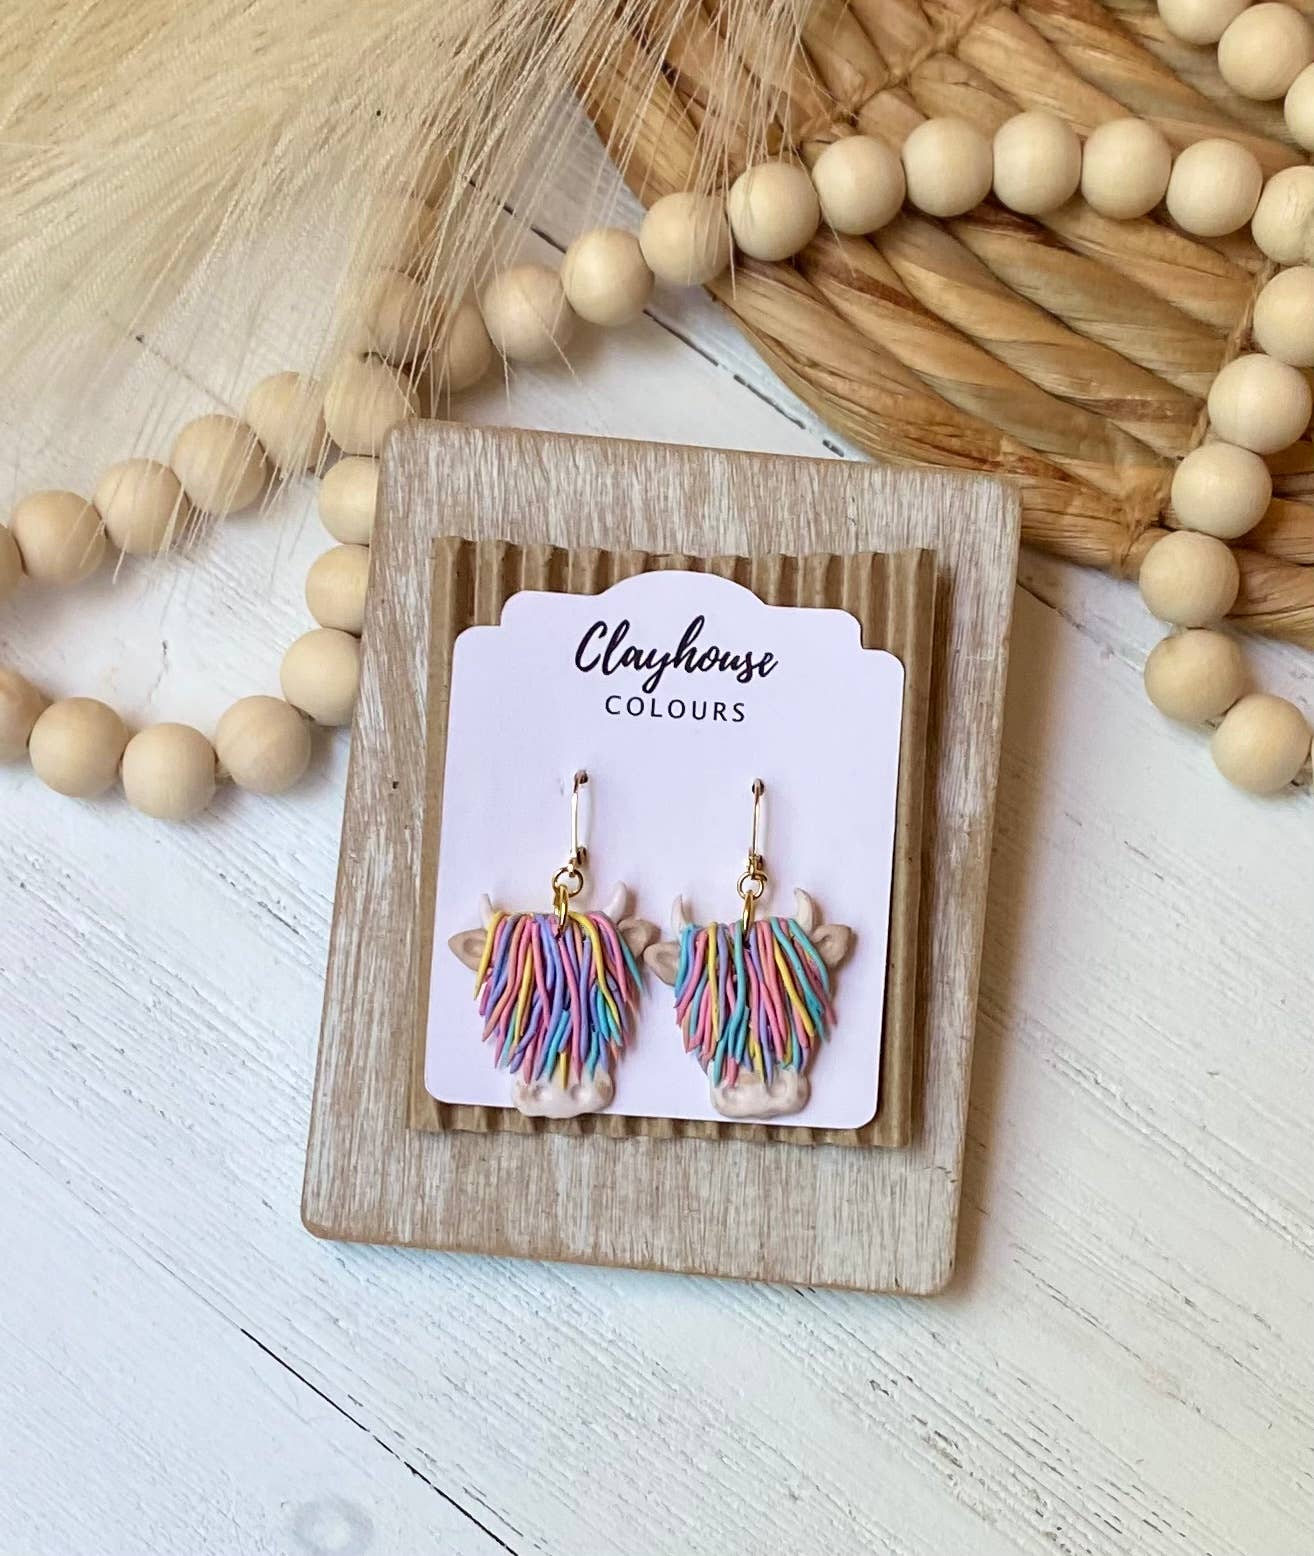 Clayhouse Colours - Highland Cow Clay Earrings